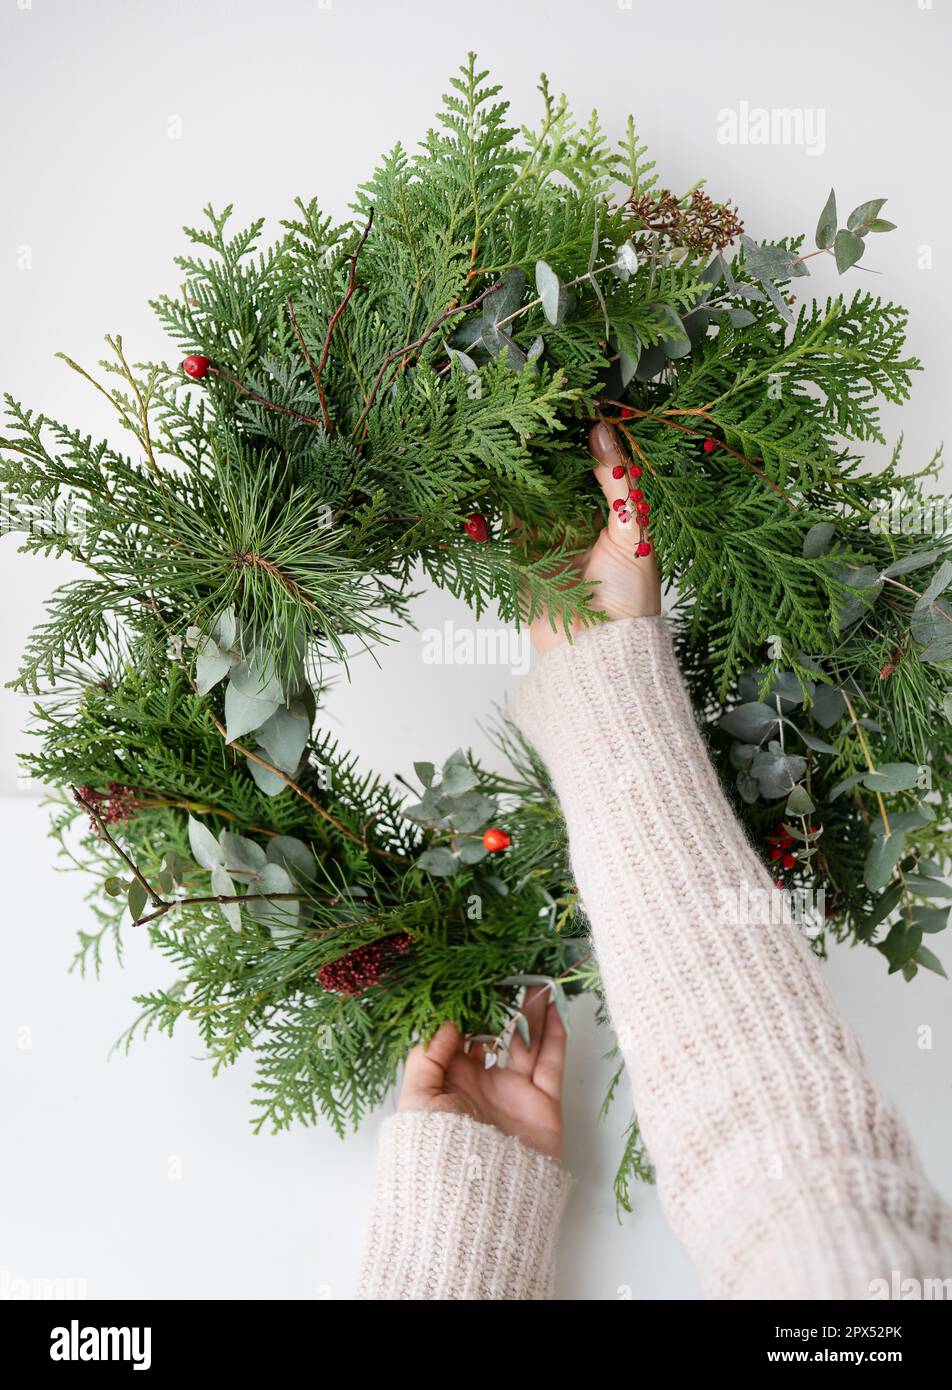 Stylish Christmas wreath for the interior, hang the wreath on the door. Handmade, the girl holds a freshly made wreath in her hands. The atmosphere of Stock Photo